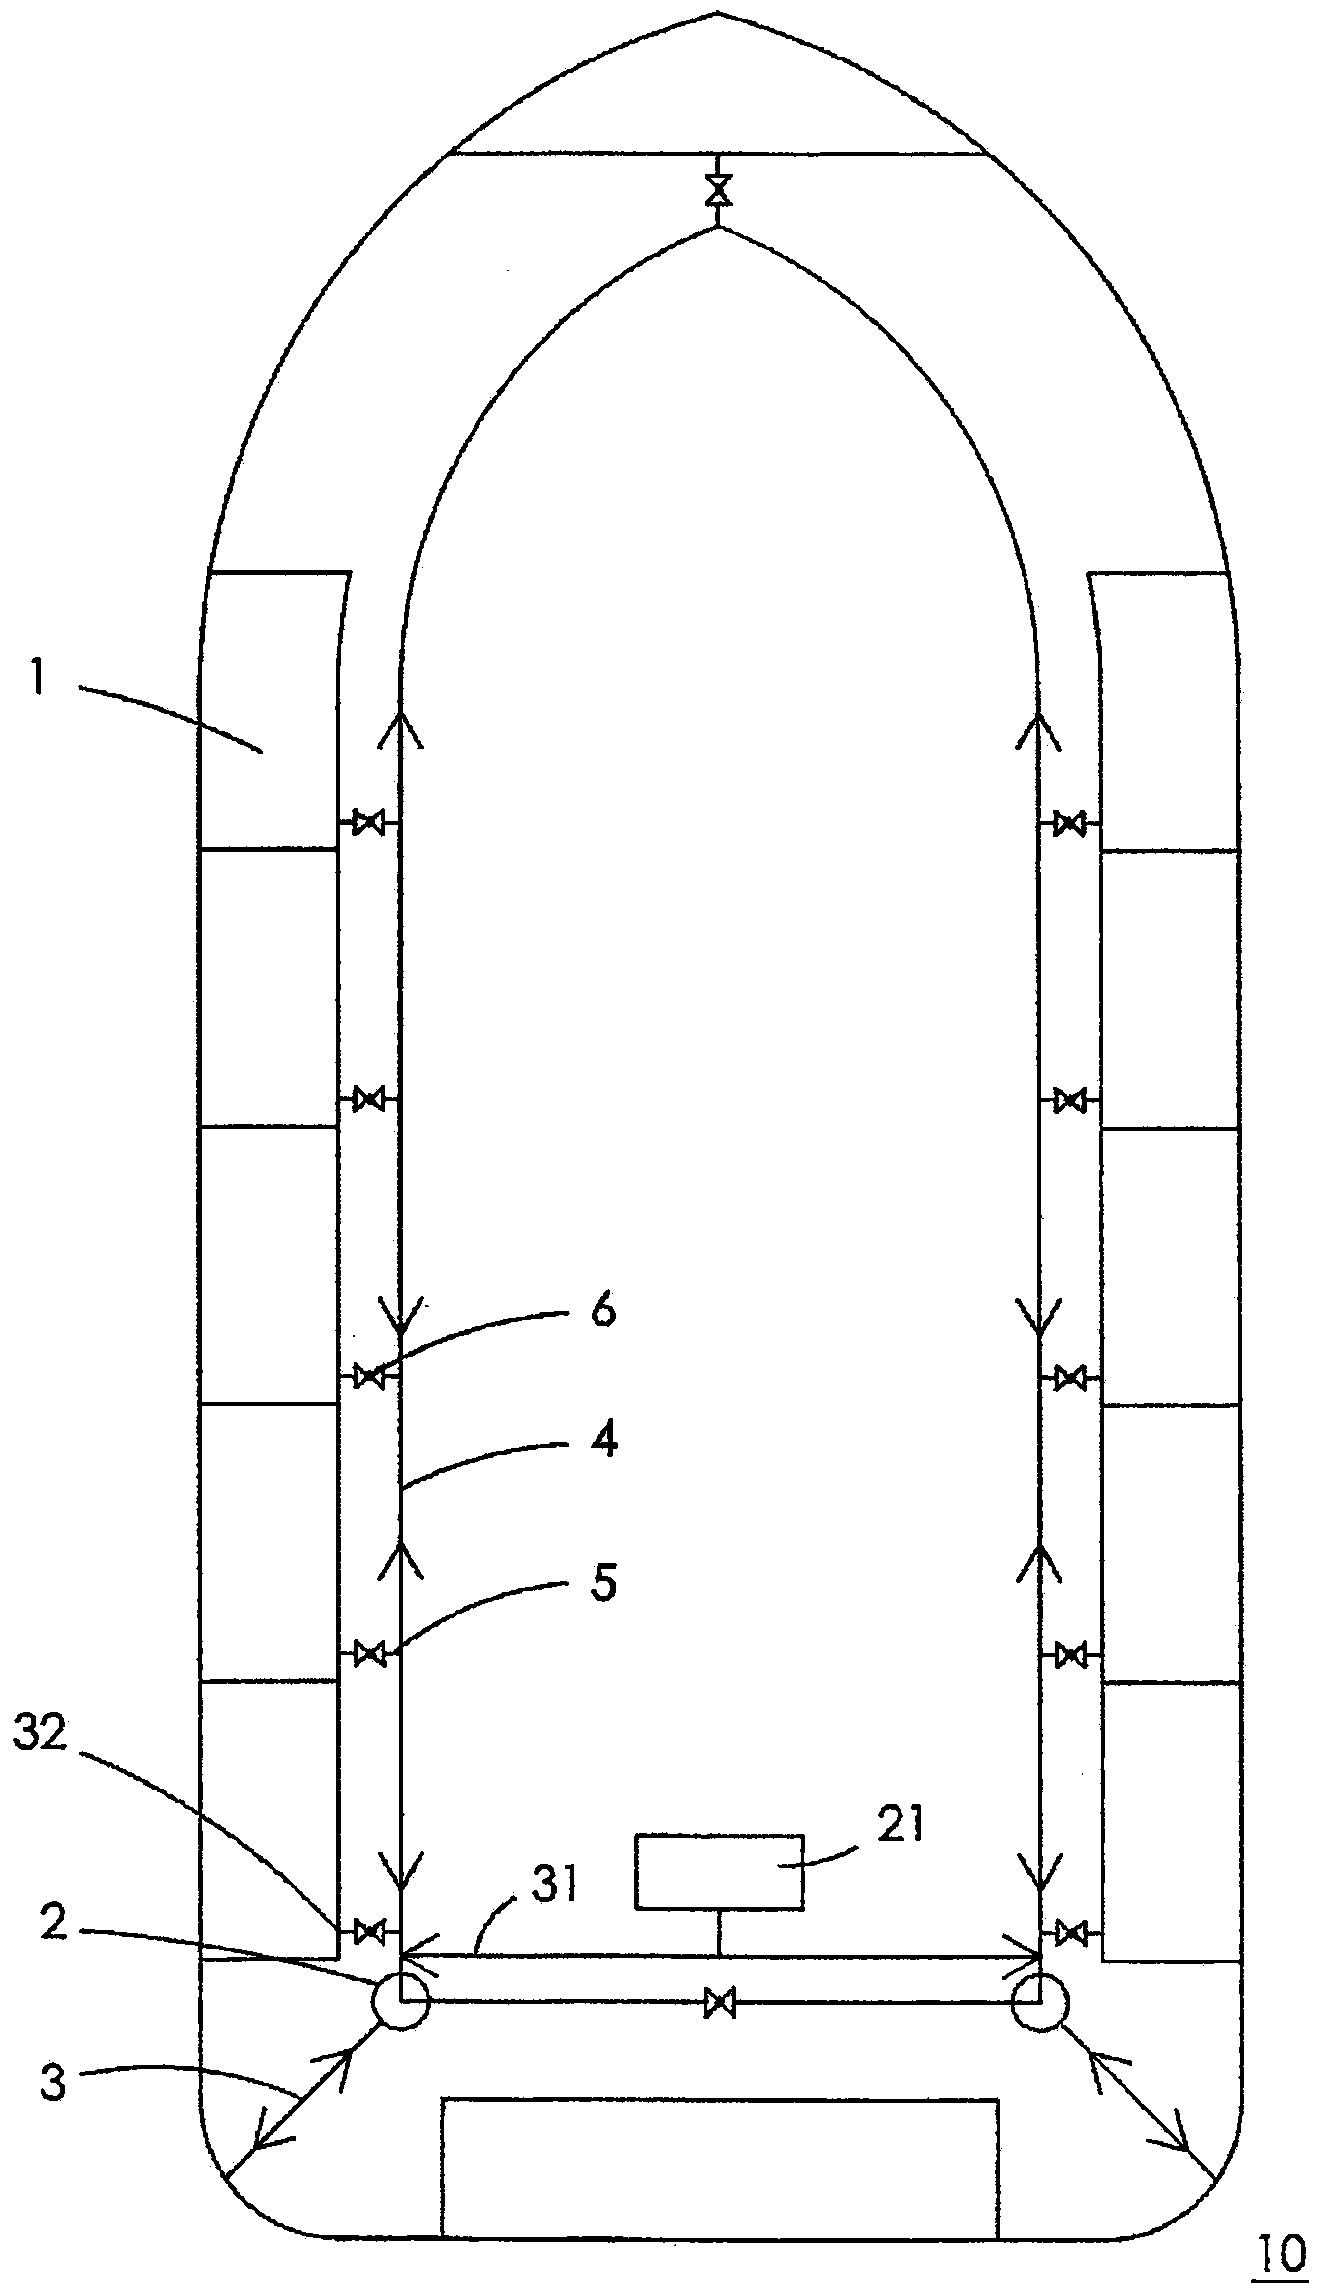 System for treating ballast water in ballast tanks